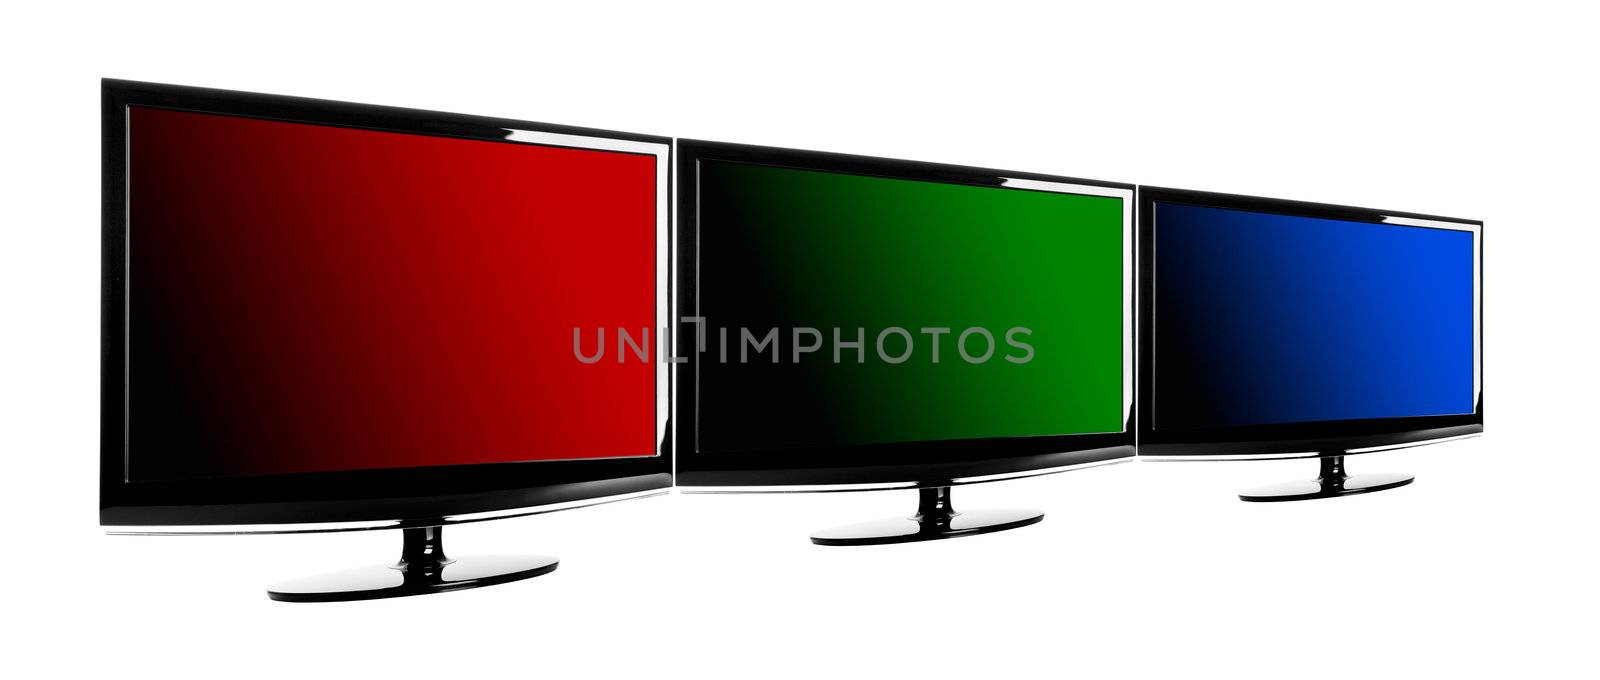 Three lcd TV's showing the RGB colors; red, green and blue.